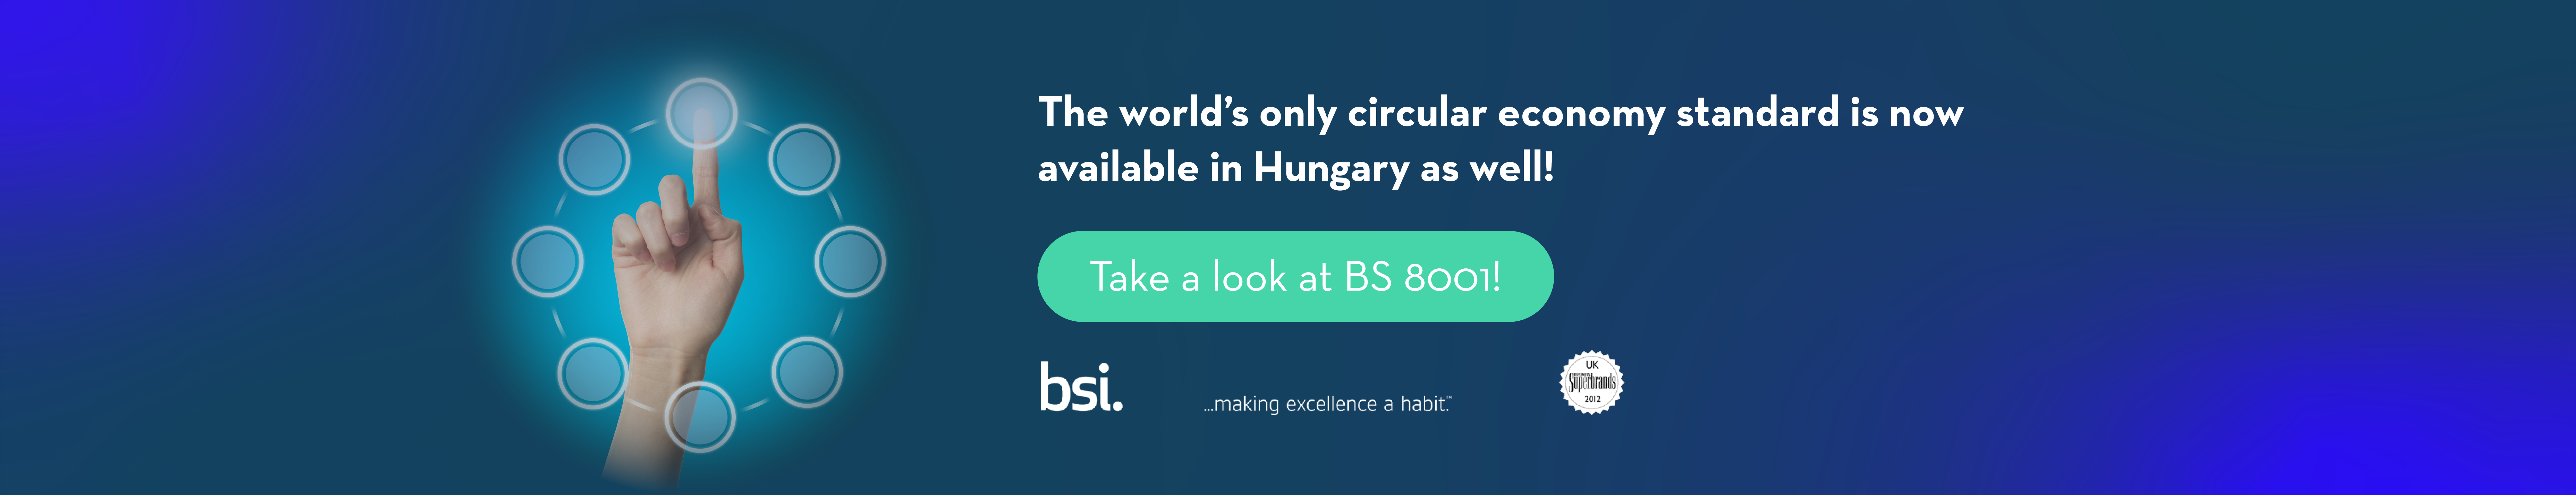 The world's only circular economy standard is now available in Hungary as well!